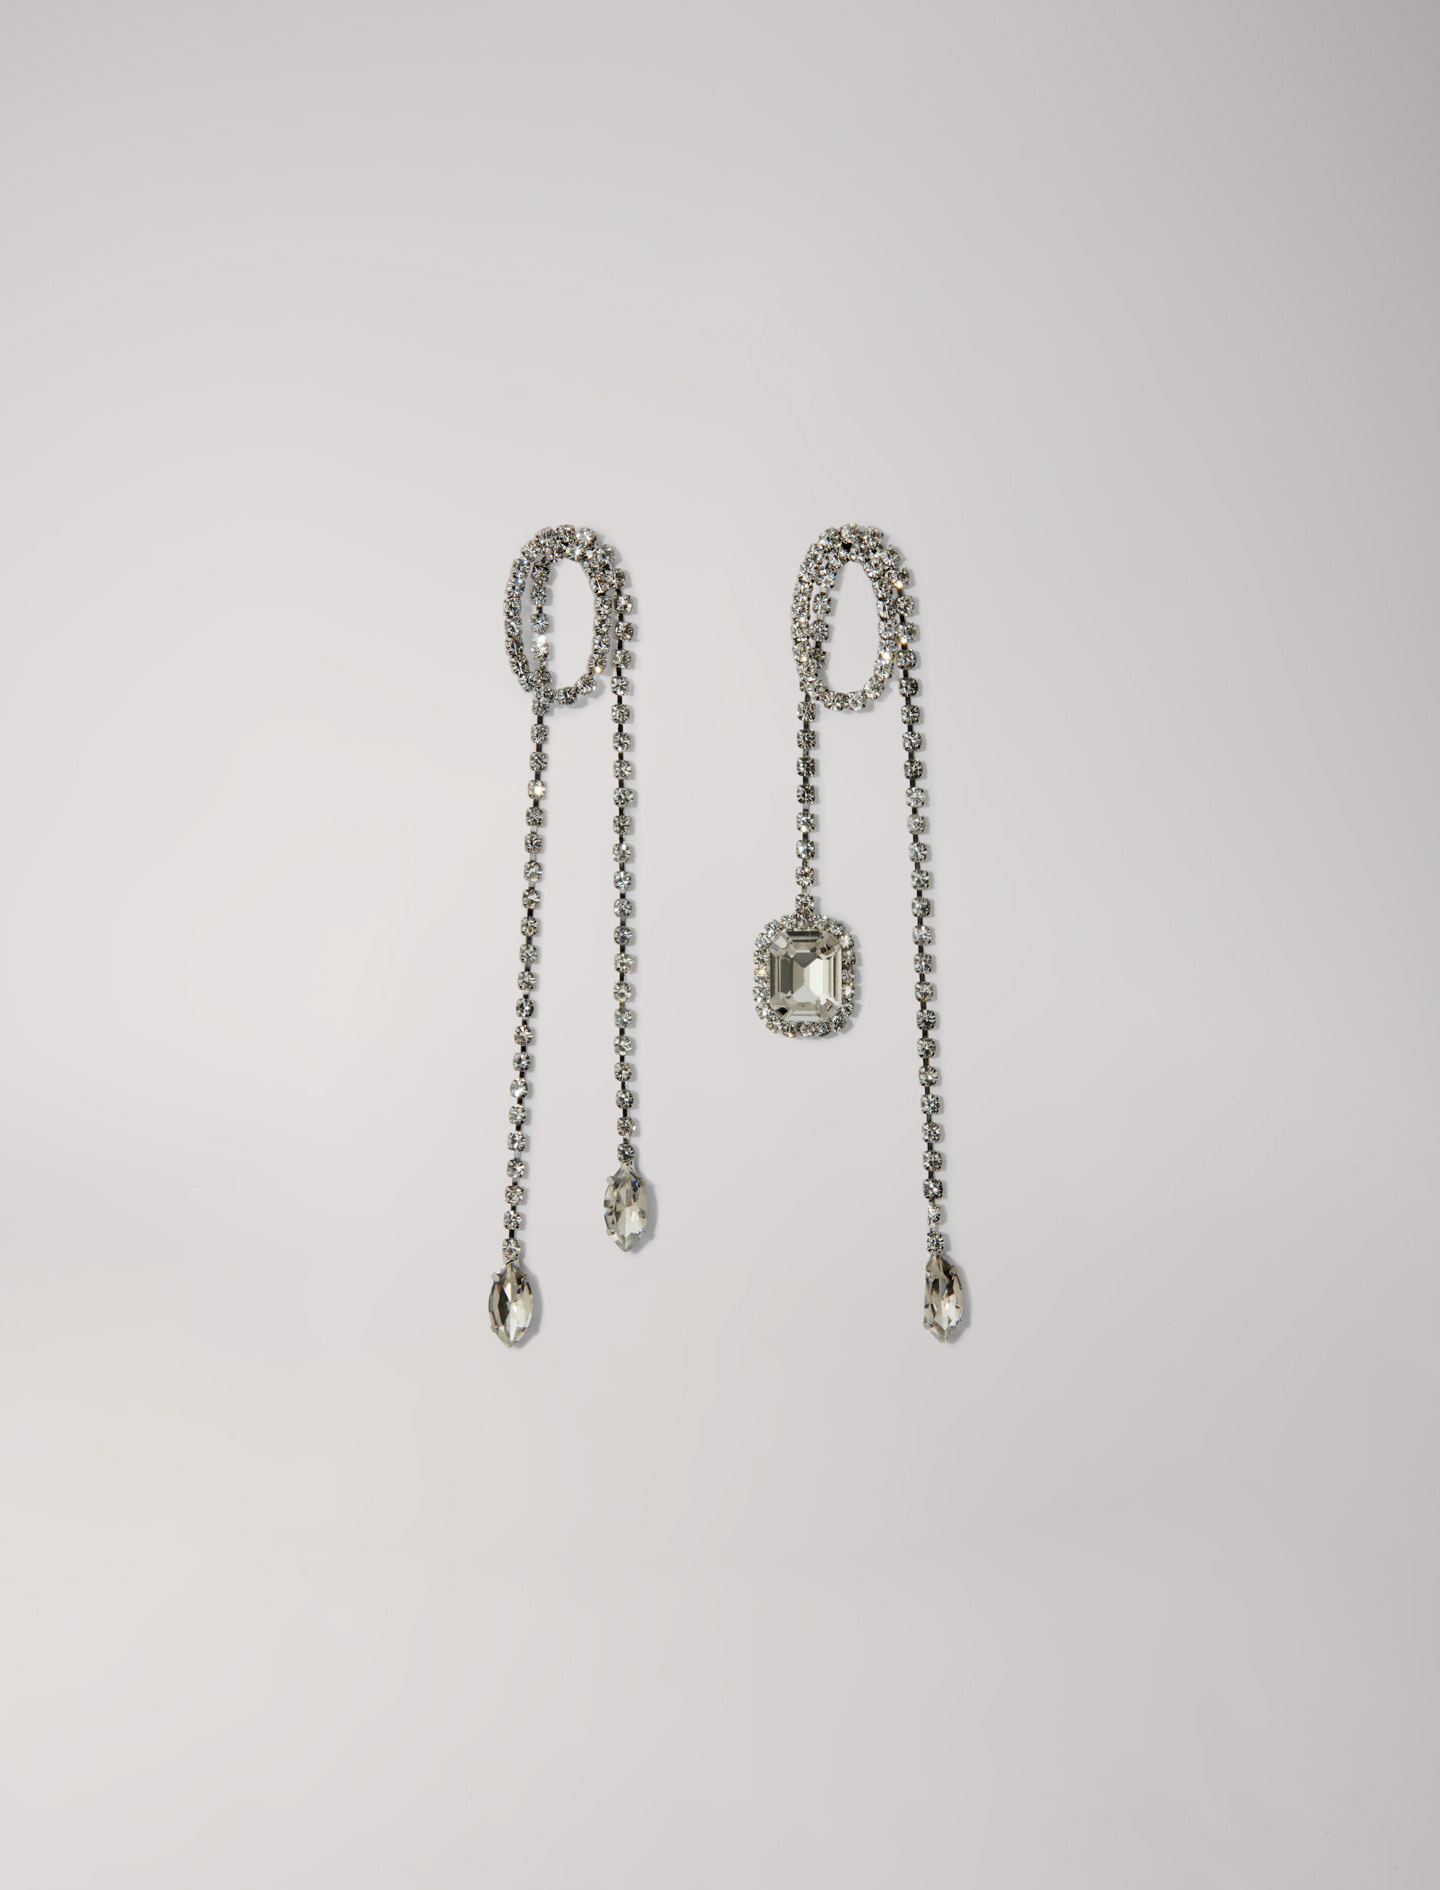 Mixte's glass Jewellery: Rhinestone earrings for Fall/Winter, size Mixte-All Accessories-OS (ONE SIZE), in color Silver / Grey